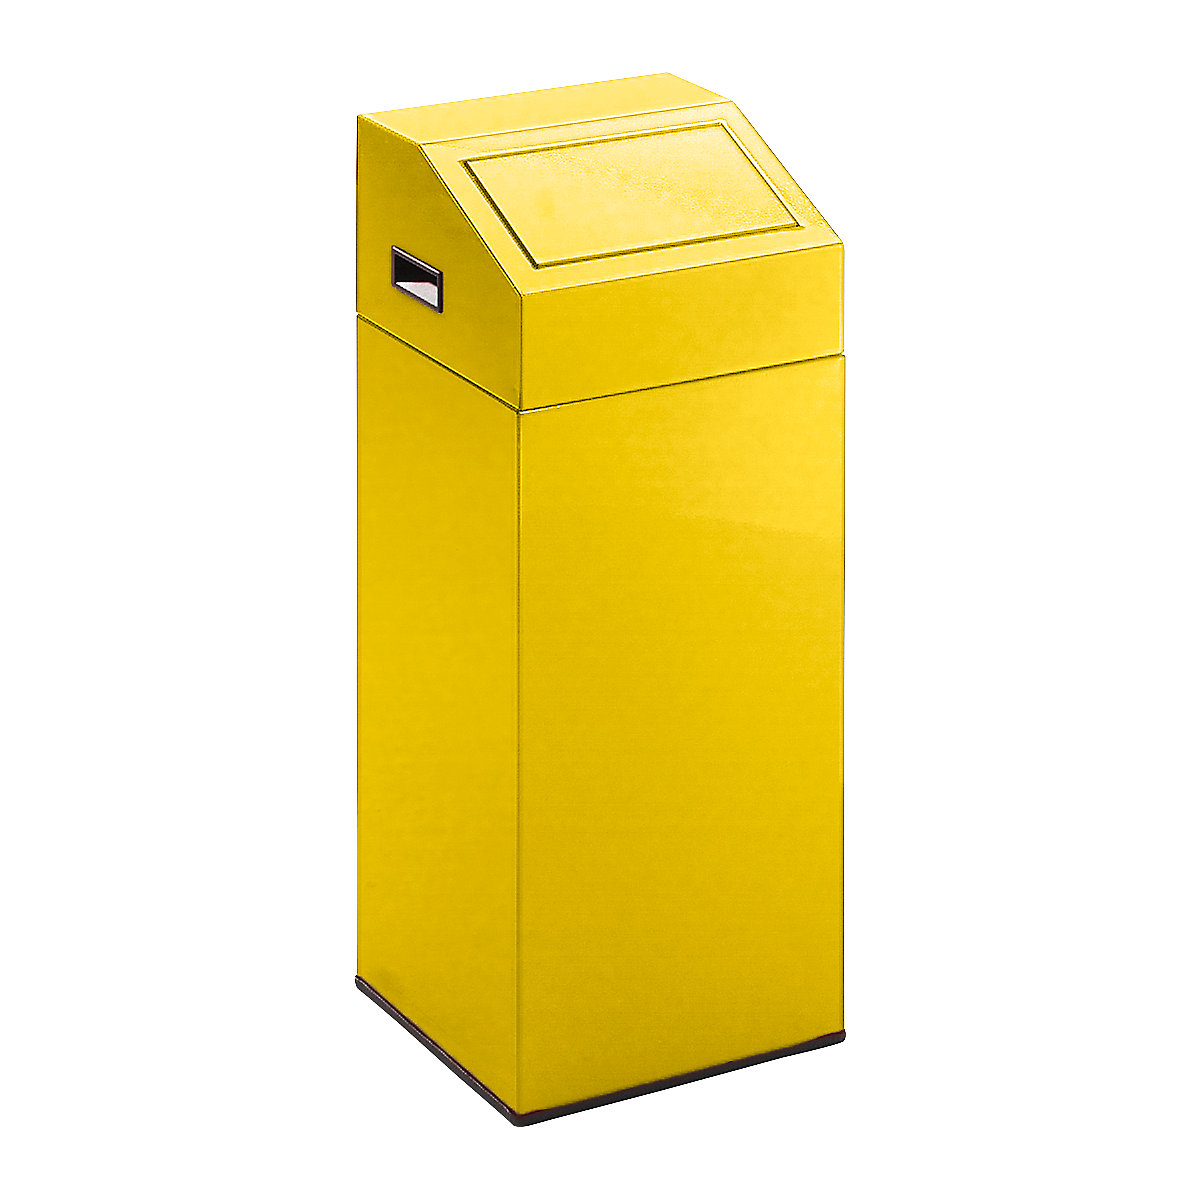 Recyclable waste collector – eurokraft pro, capacity 45 l, WxHxD 320 x 790 x 320 mm, traffic yellow